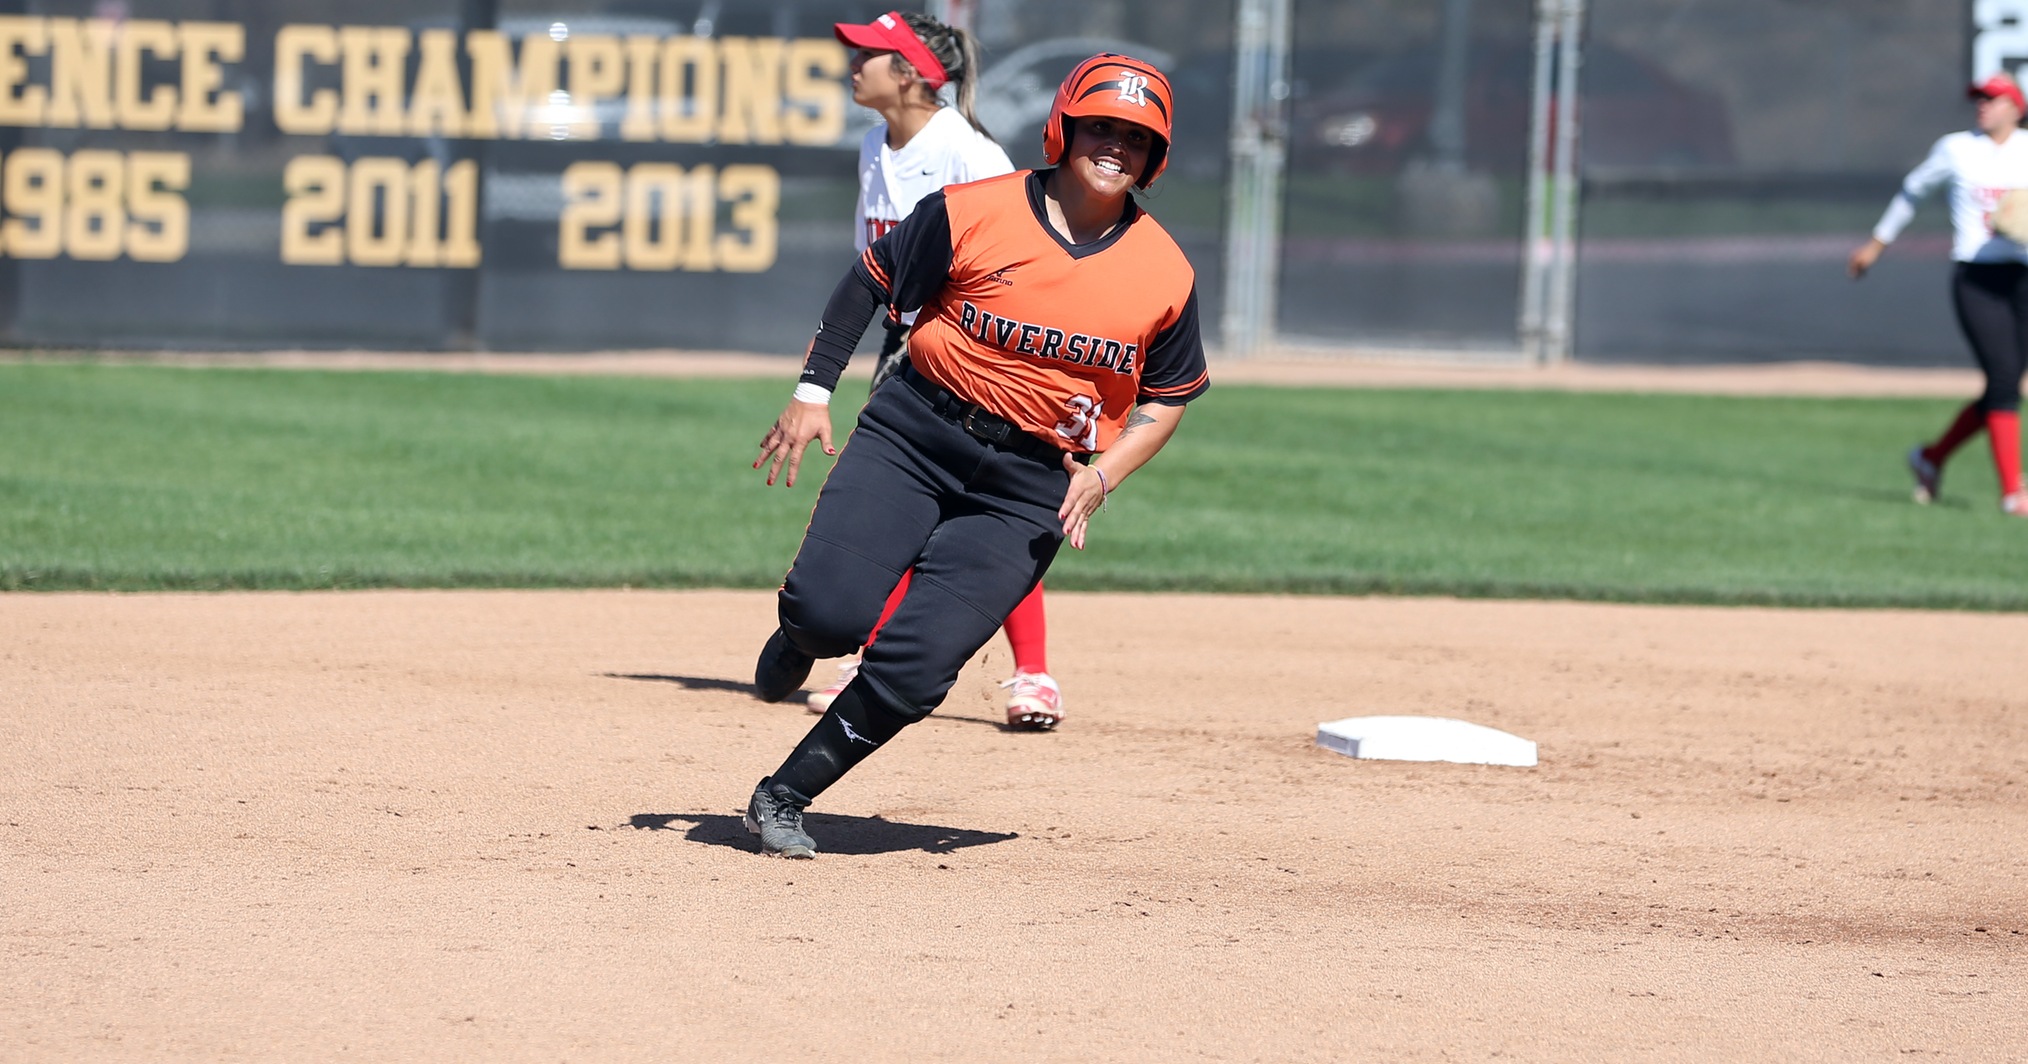 In the past three games, Danielle Lopez is 8-for-10 with two  homeruns, seven RBI and three runs scored. She went 2-for-4 with a two-run jack and a double in a victory over Orange Coast on Friday. (Photo by Bobby R. Hester)